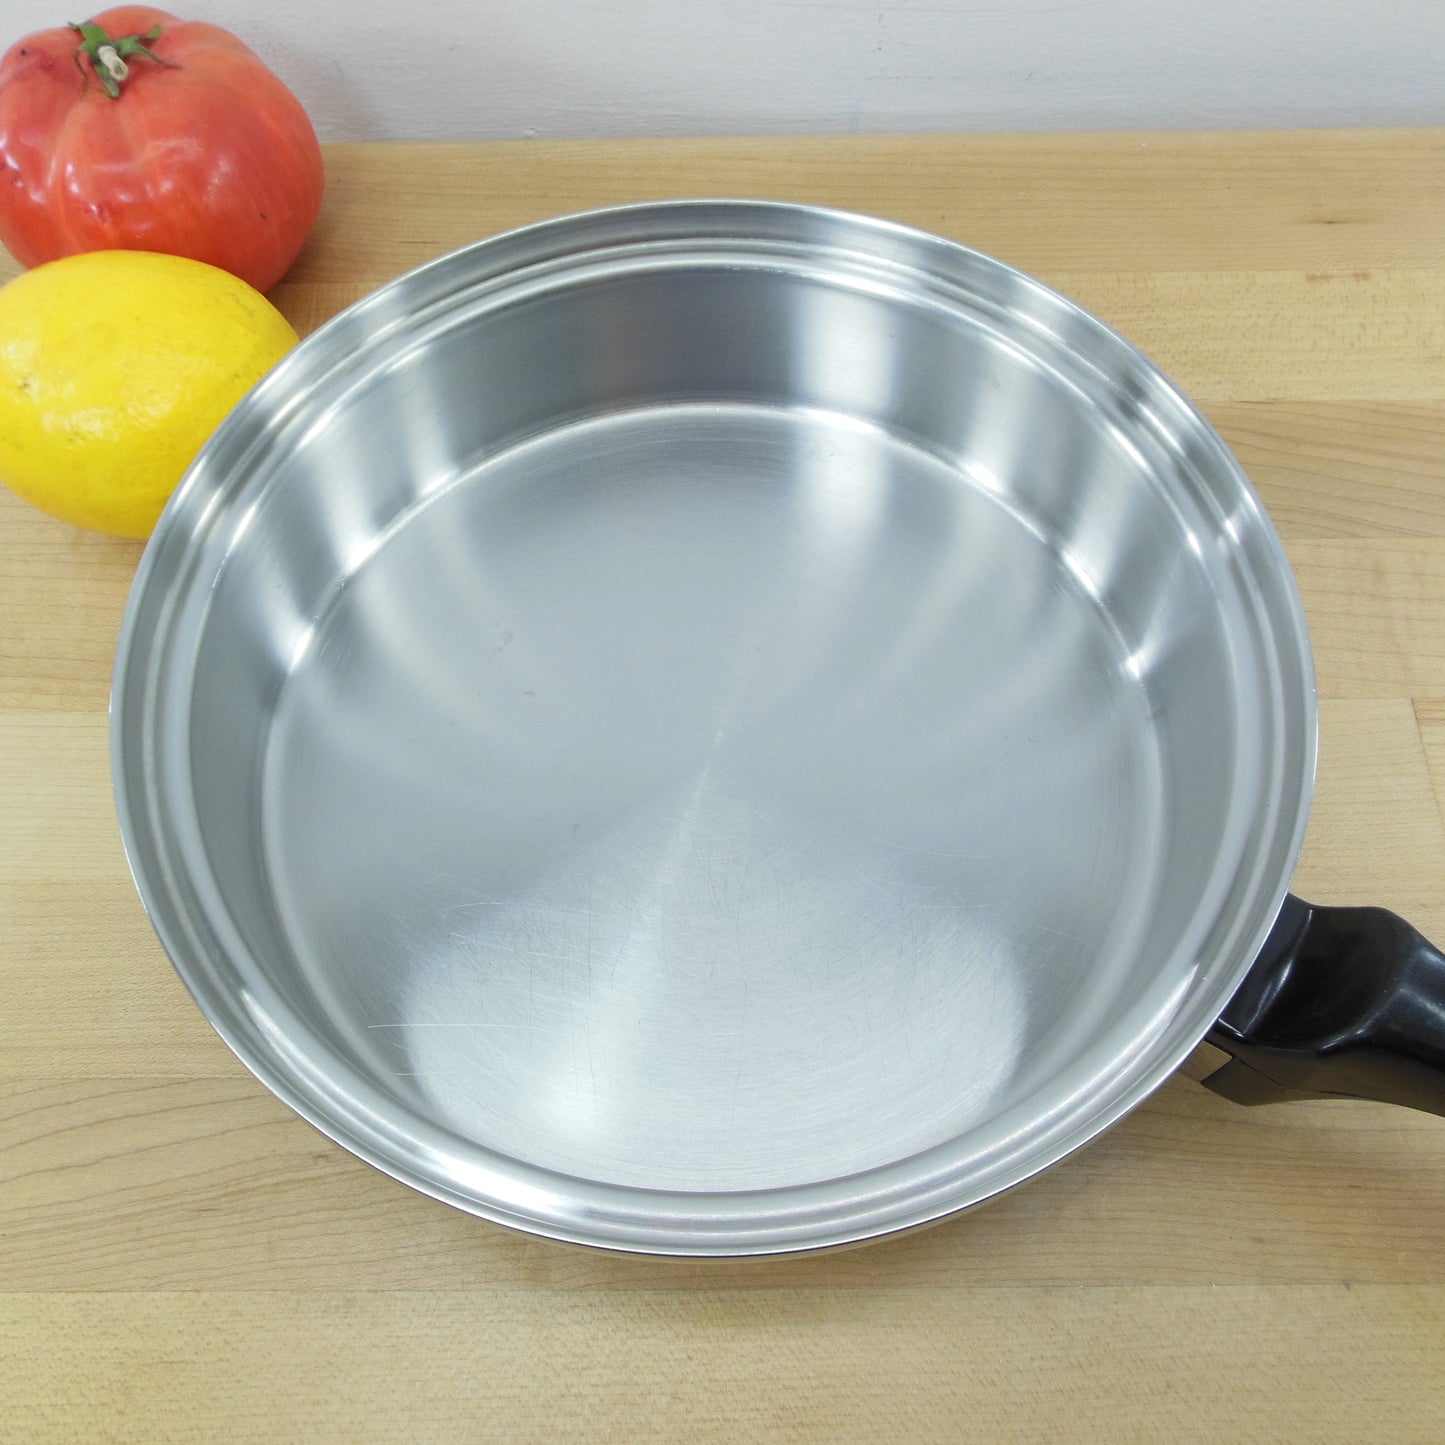 Townecraft Chef's Ware 8" 9" Open Skillet 5 Ply Stainless Vintage